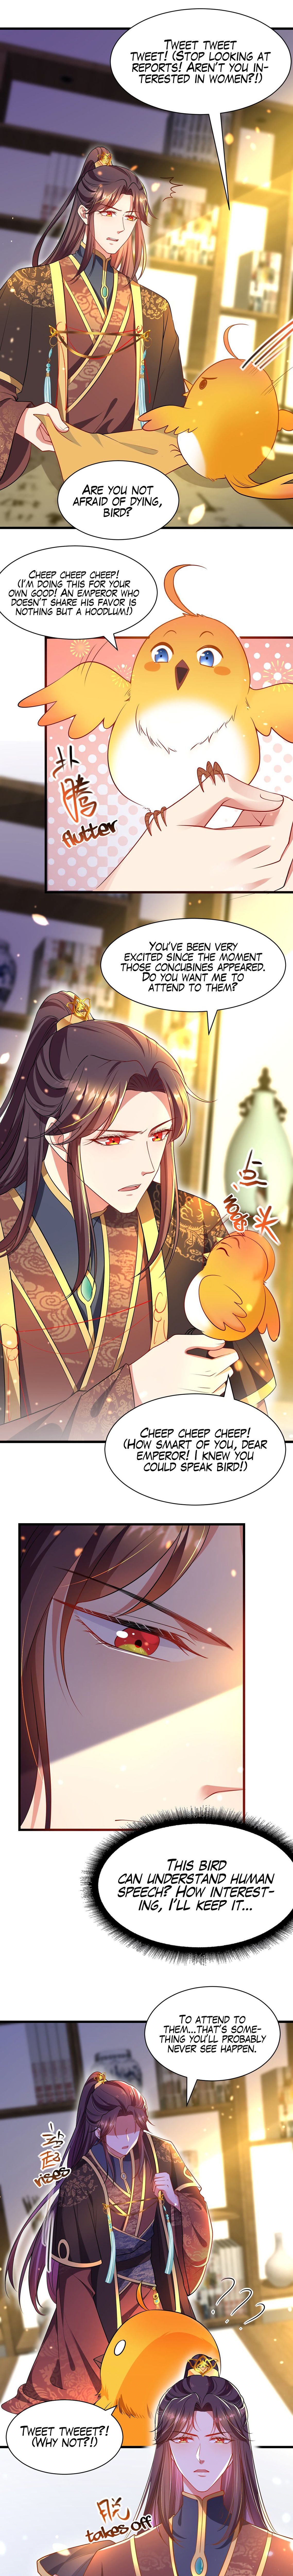 Boss of the Emperor’s Harem chapter 3